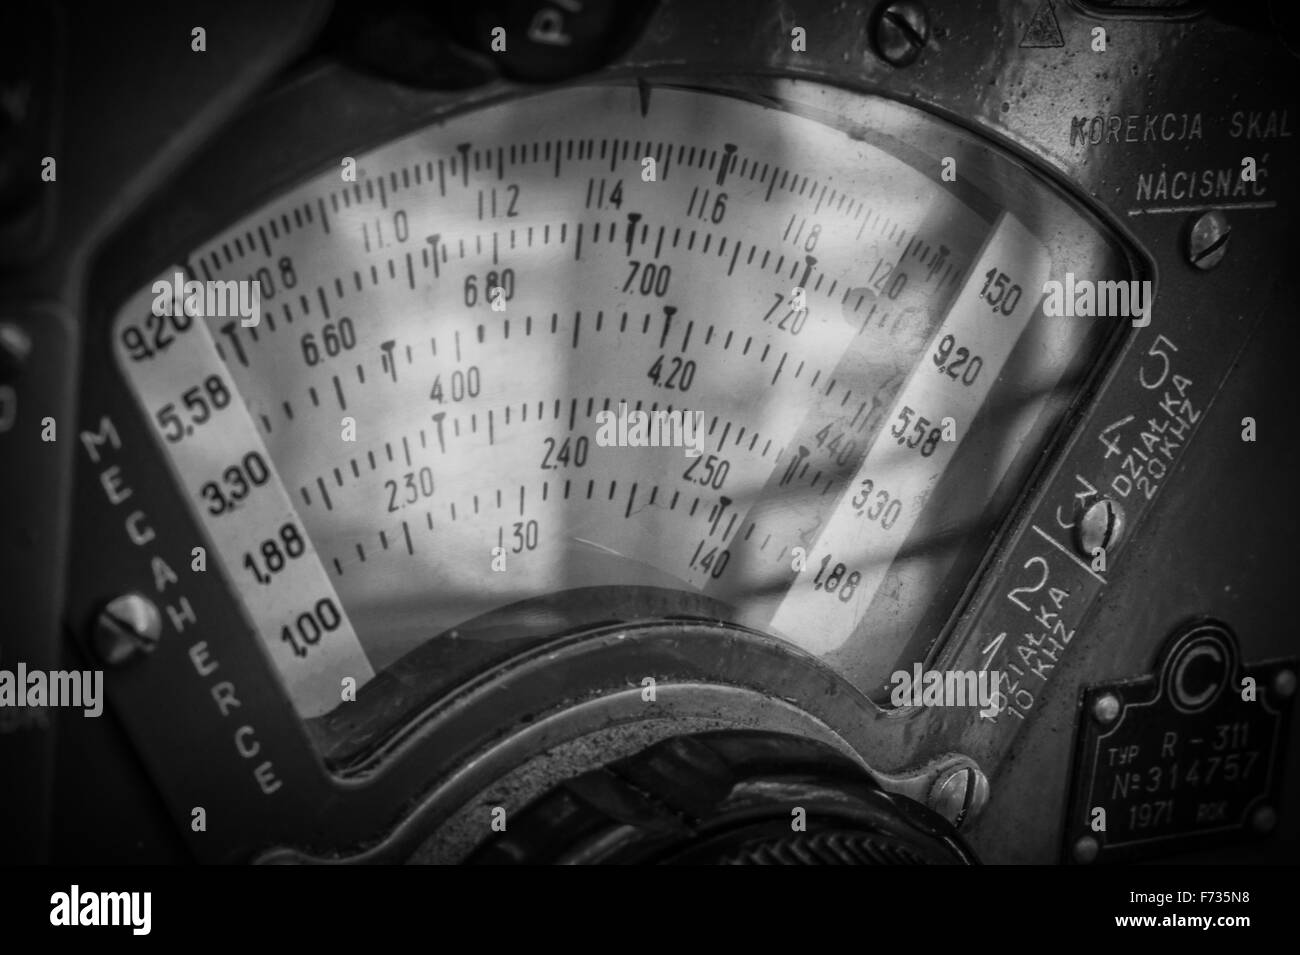 close-up of the scale of the measuring device Stock Photo